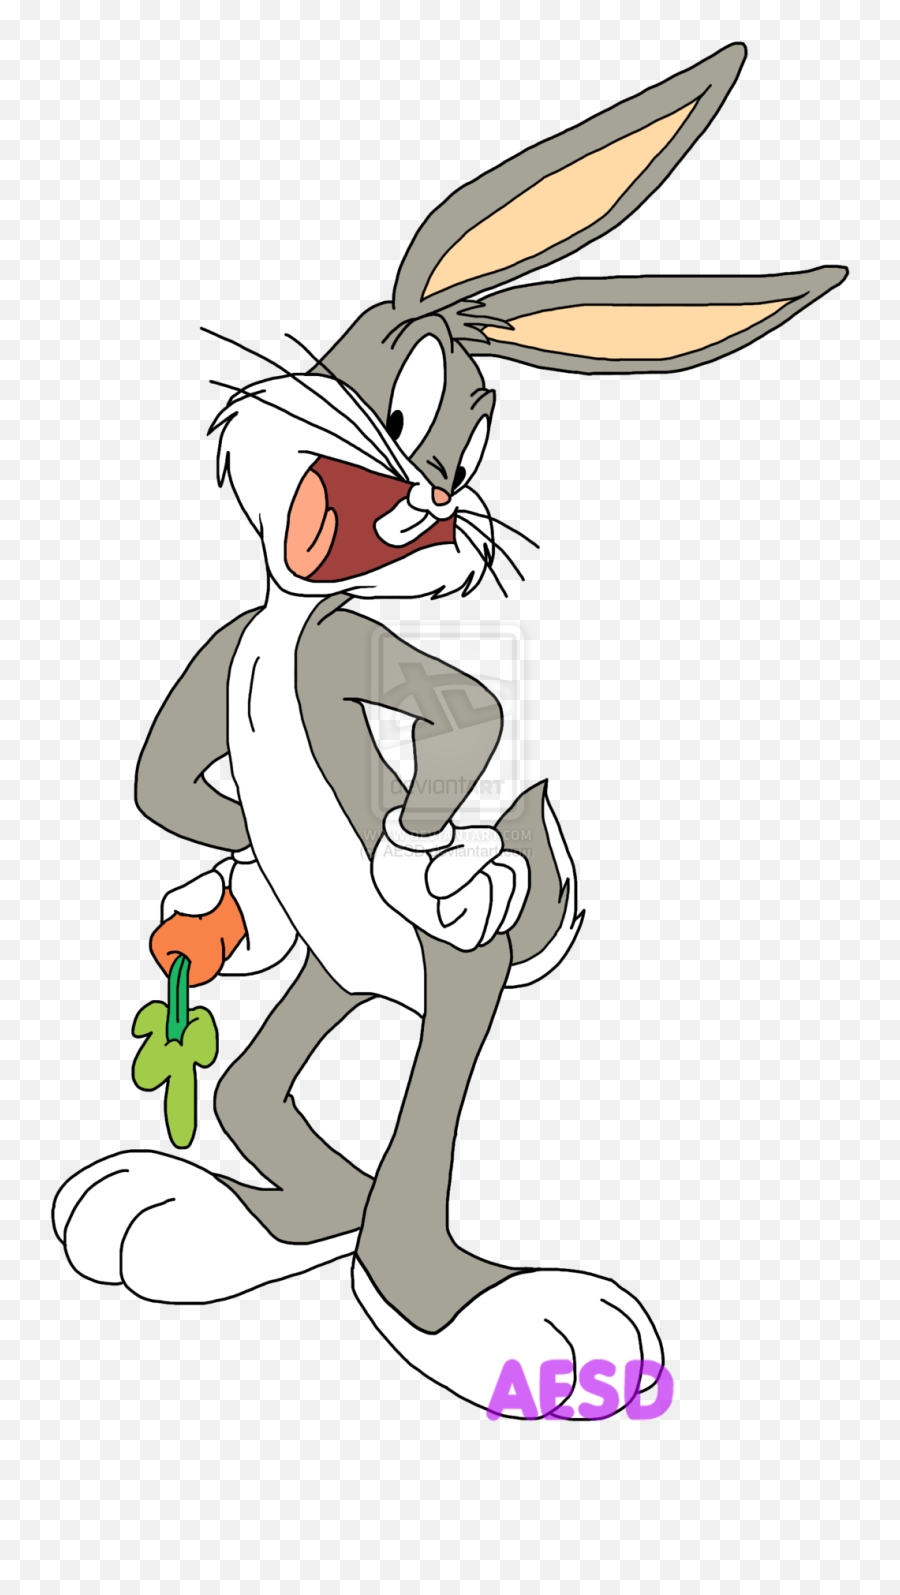 Looney Toons Bugs Bunny Quotes Quotesgram Emoji,Looney Toons Logo